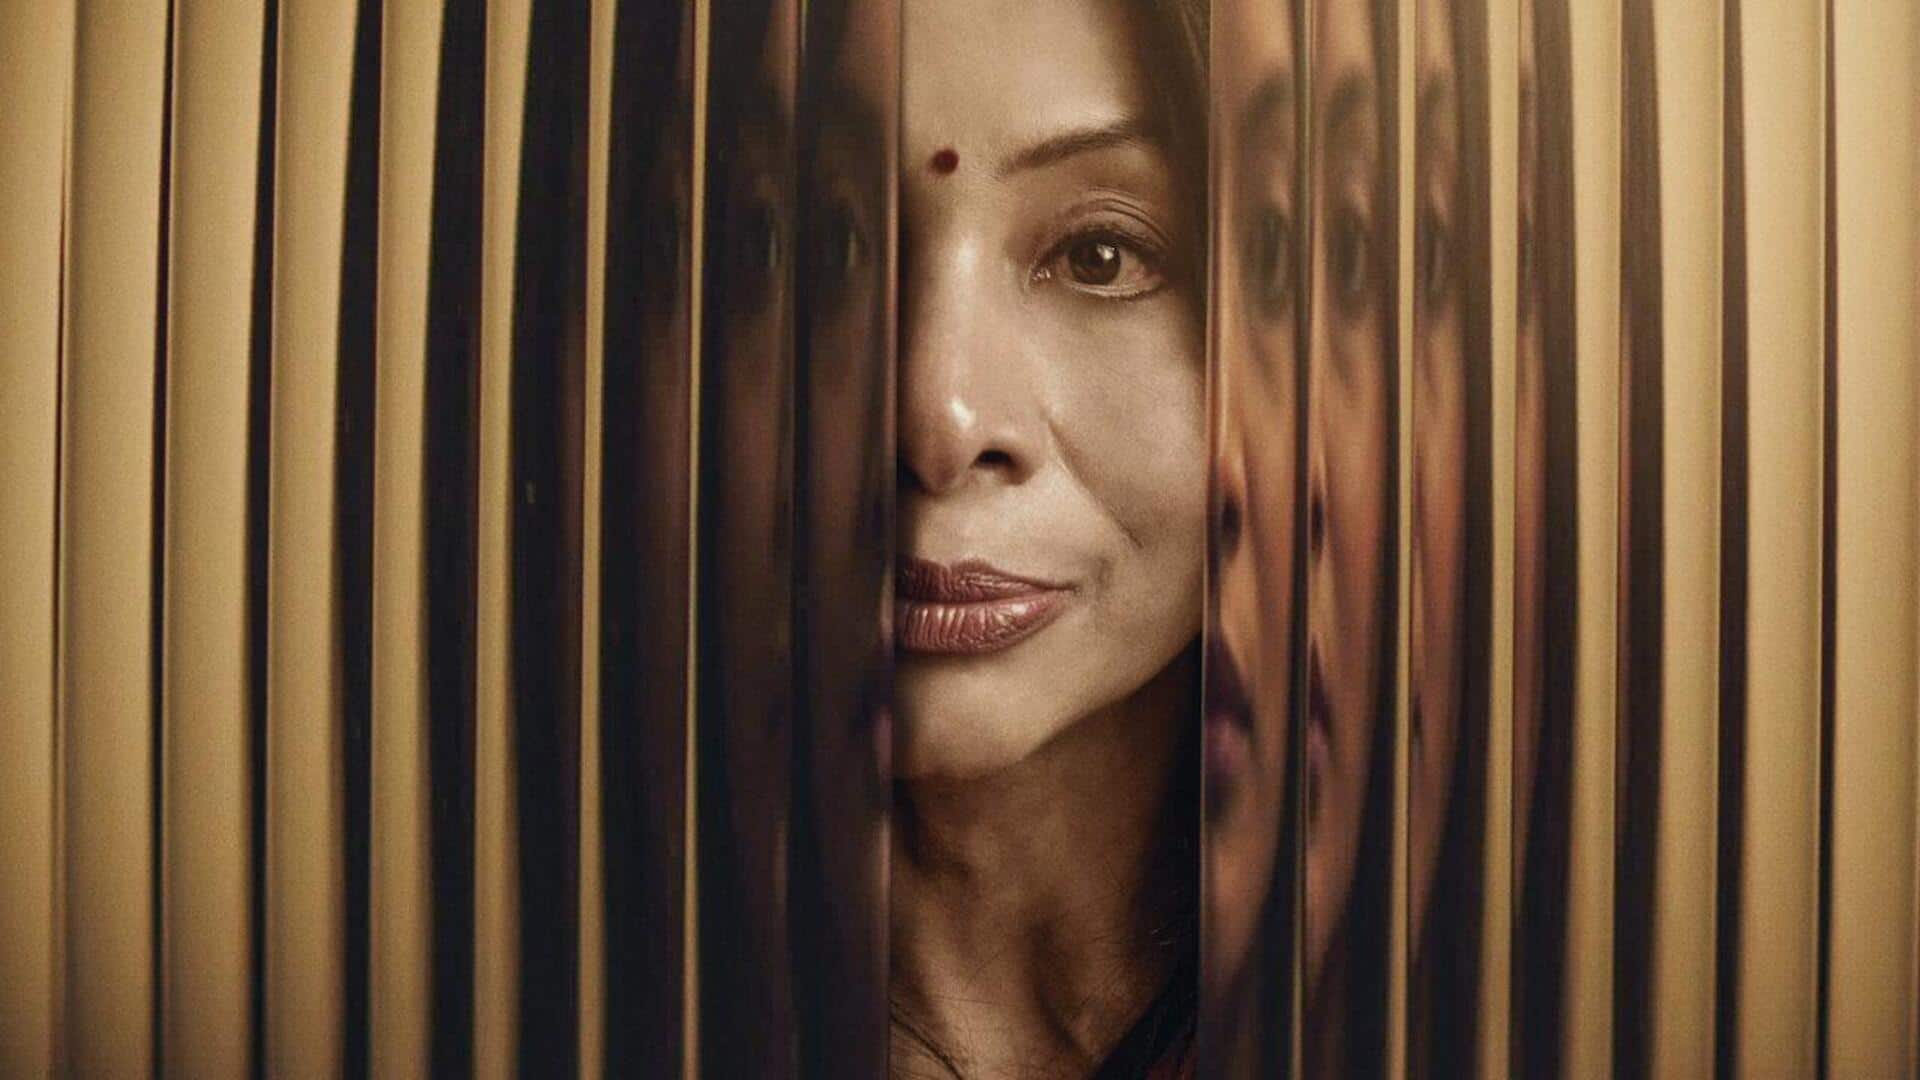 True story behind Netflix's 'The Indrani Mukerjea Story: Buried Truth'